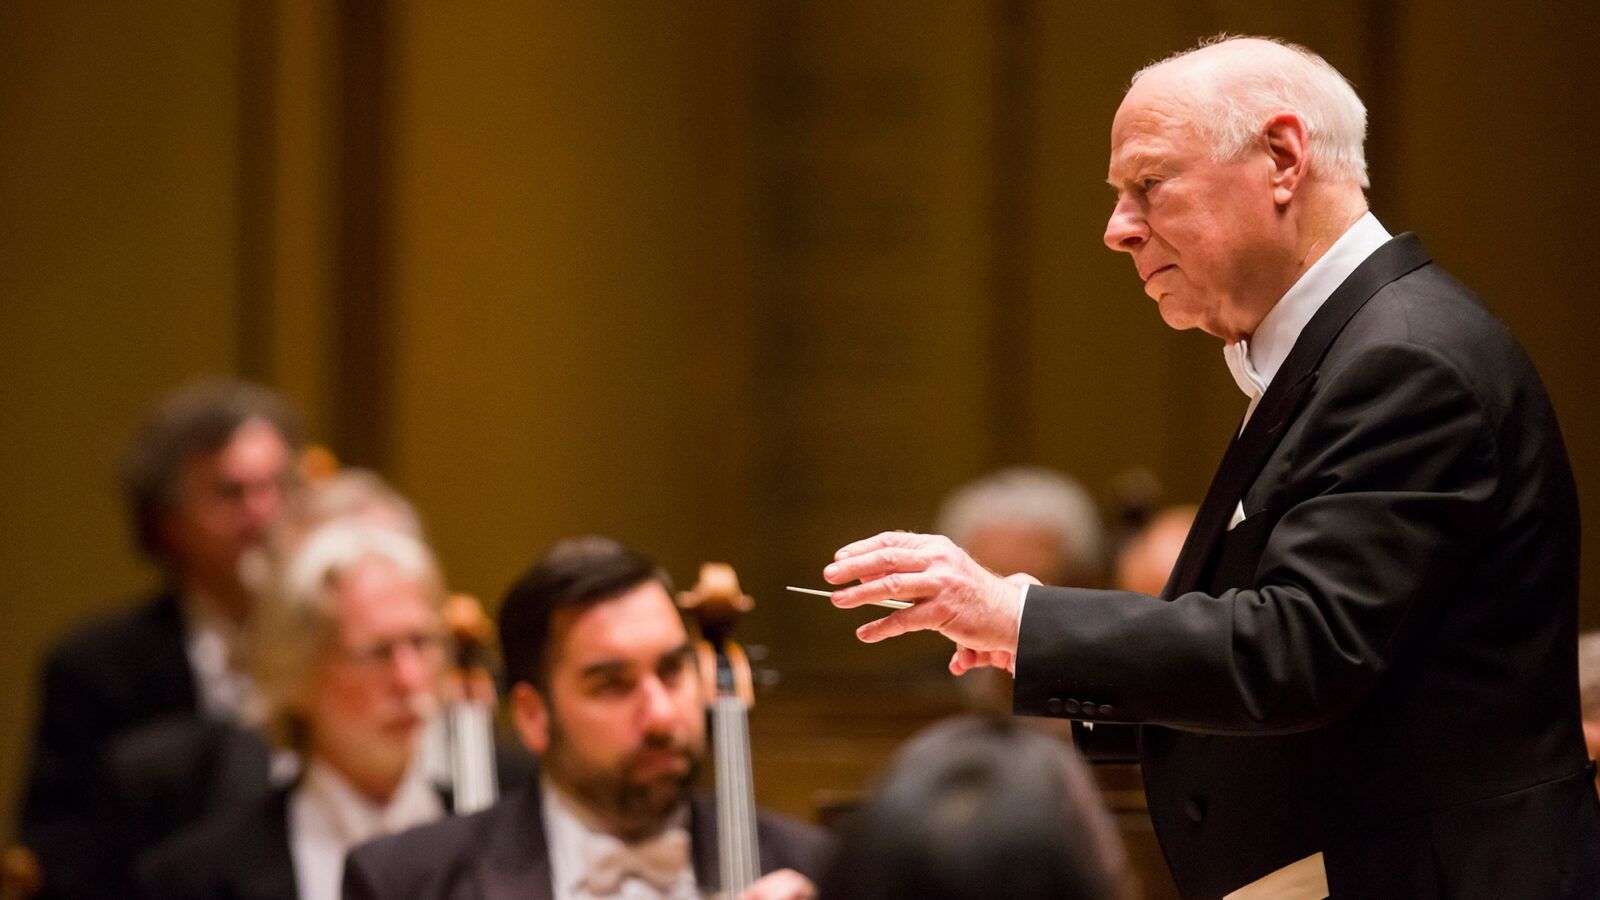 Featured image for “Legendary Conductor Bernard Haitink Has Died, Age 92”